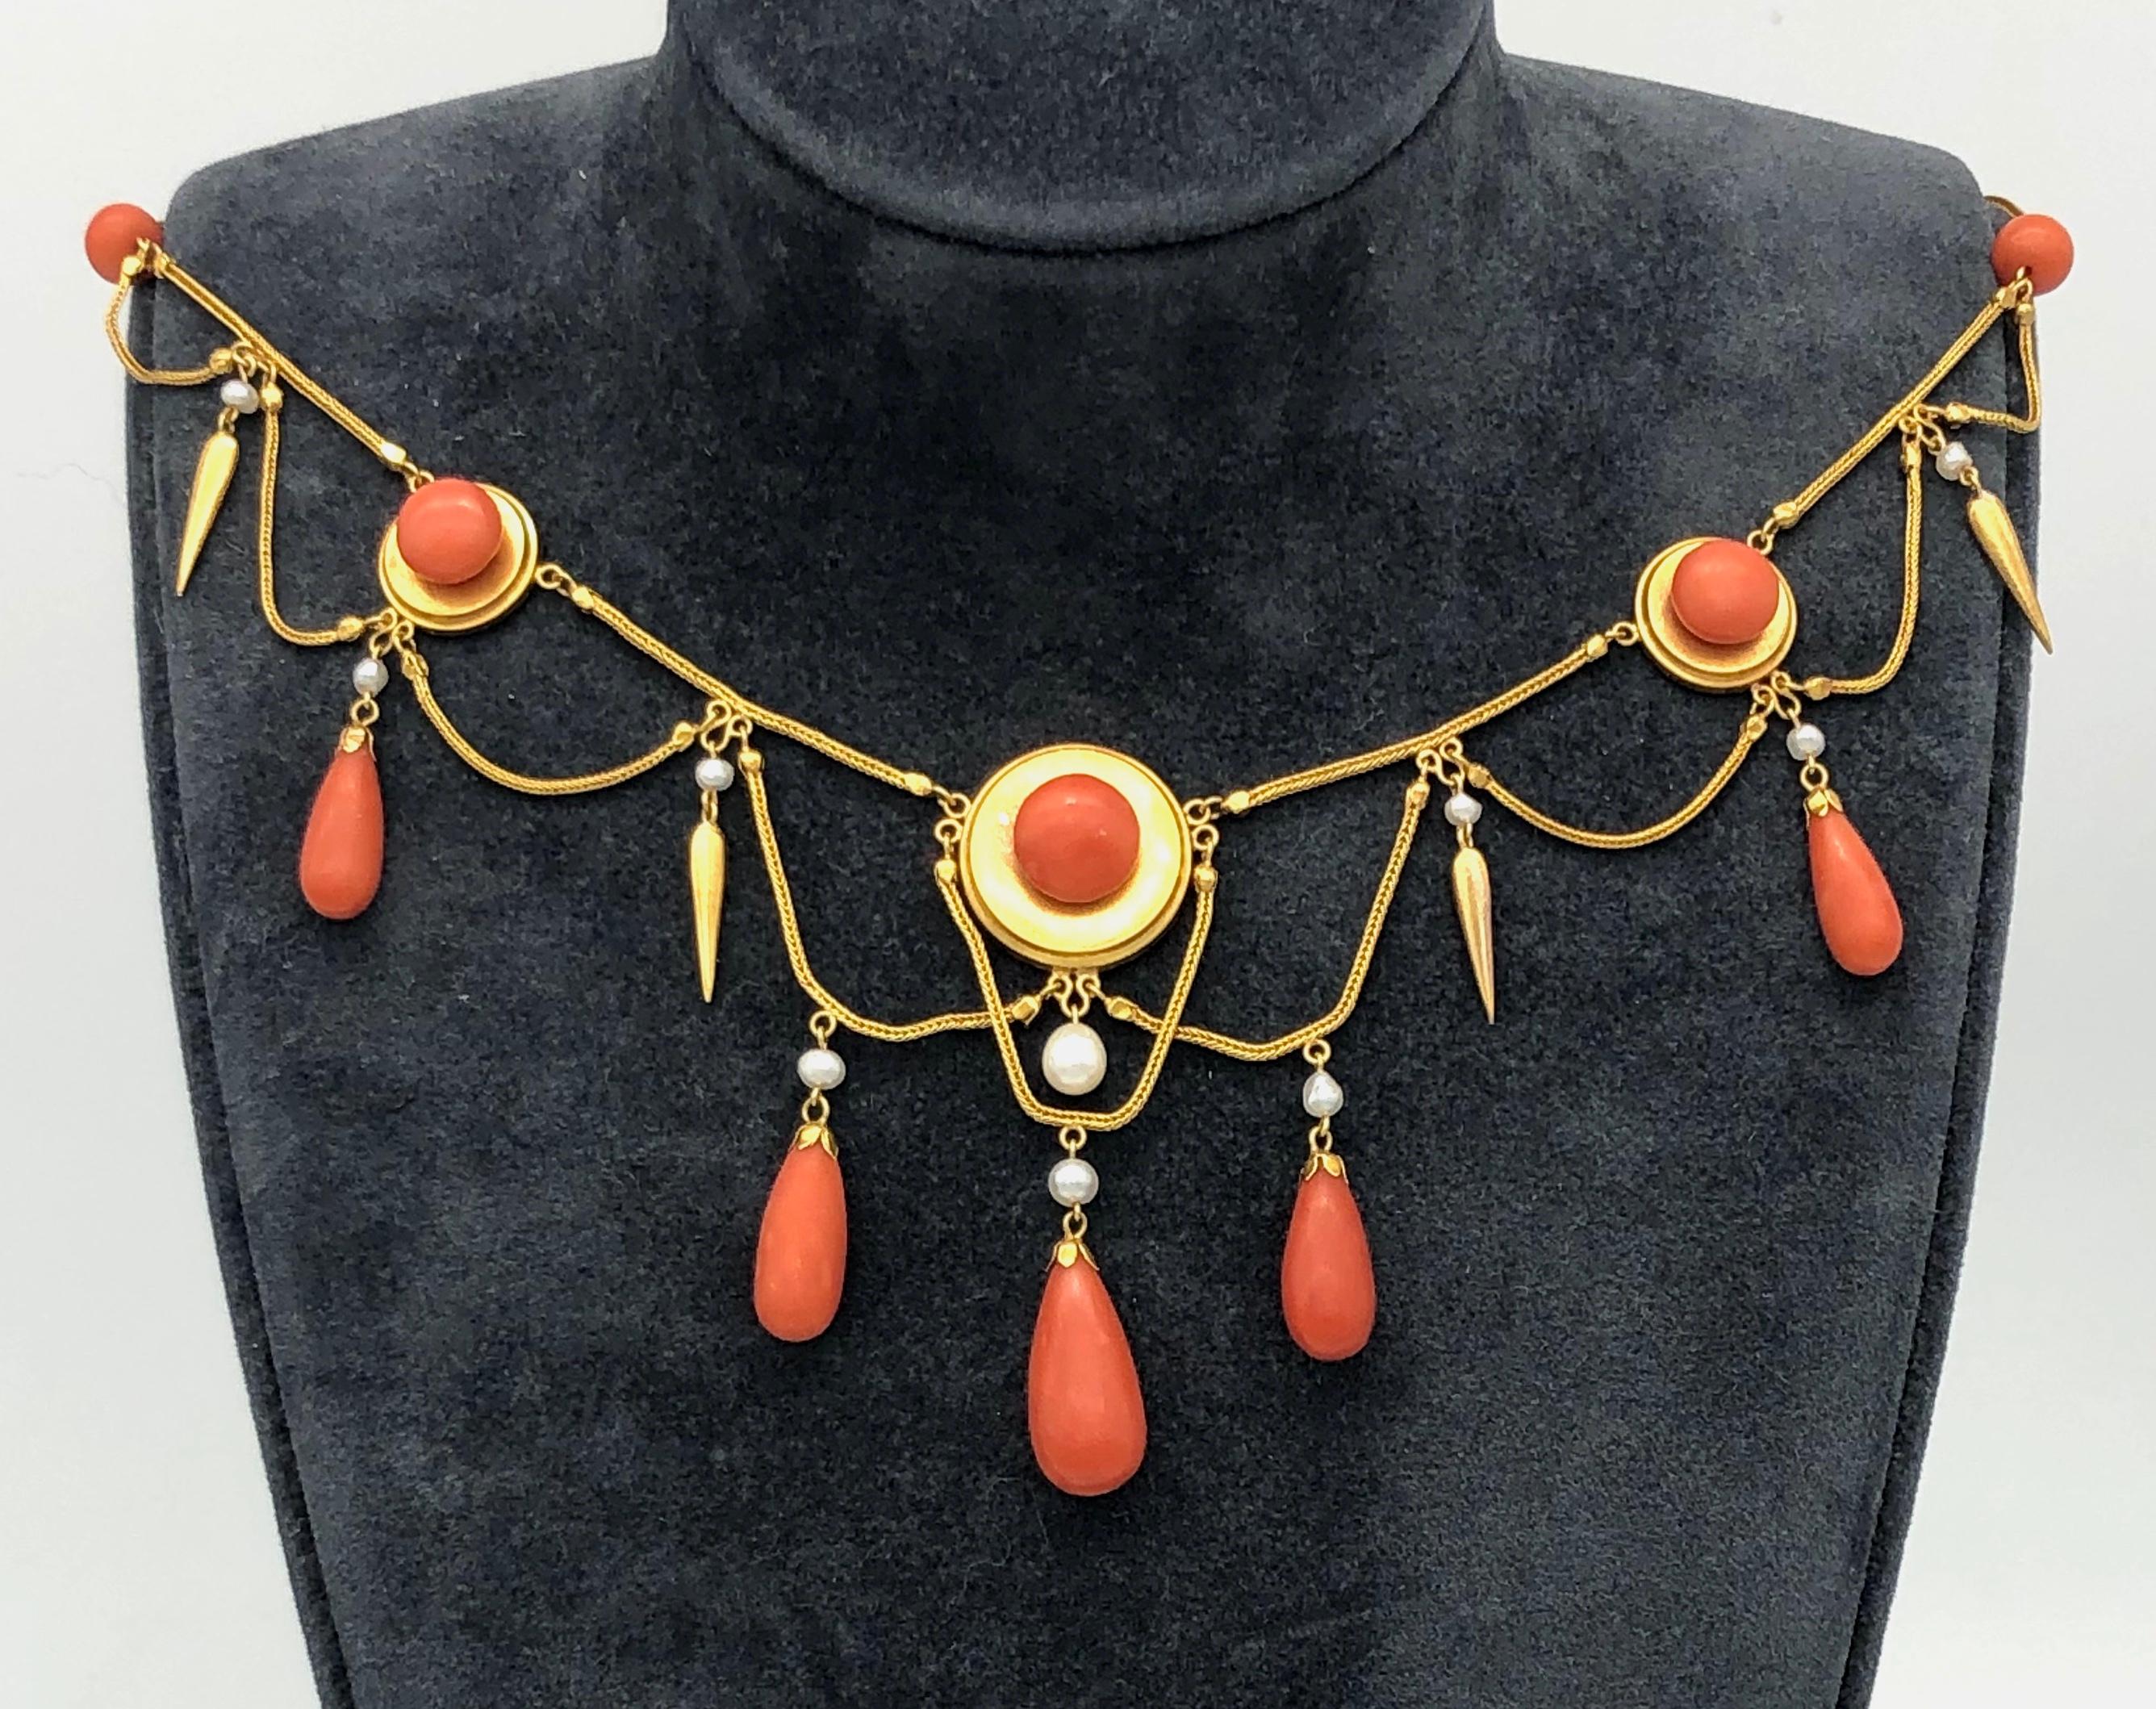 Very elegant and delicate necklace made out of 18 karat gold around 1870 in the neo archeological style. Fine fox tail chains alternate with coral beads and round gold disks reminiscent of targets. The disks, the larger one as centrepiece of the